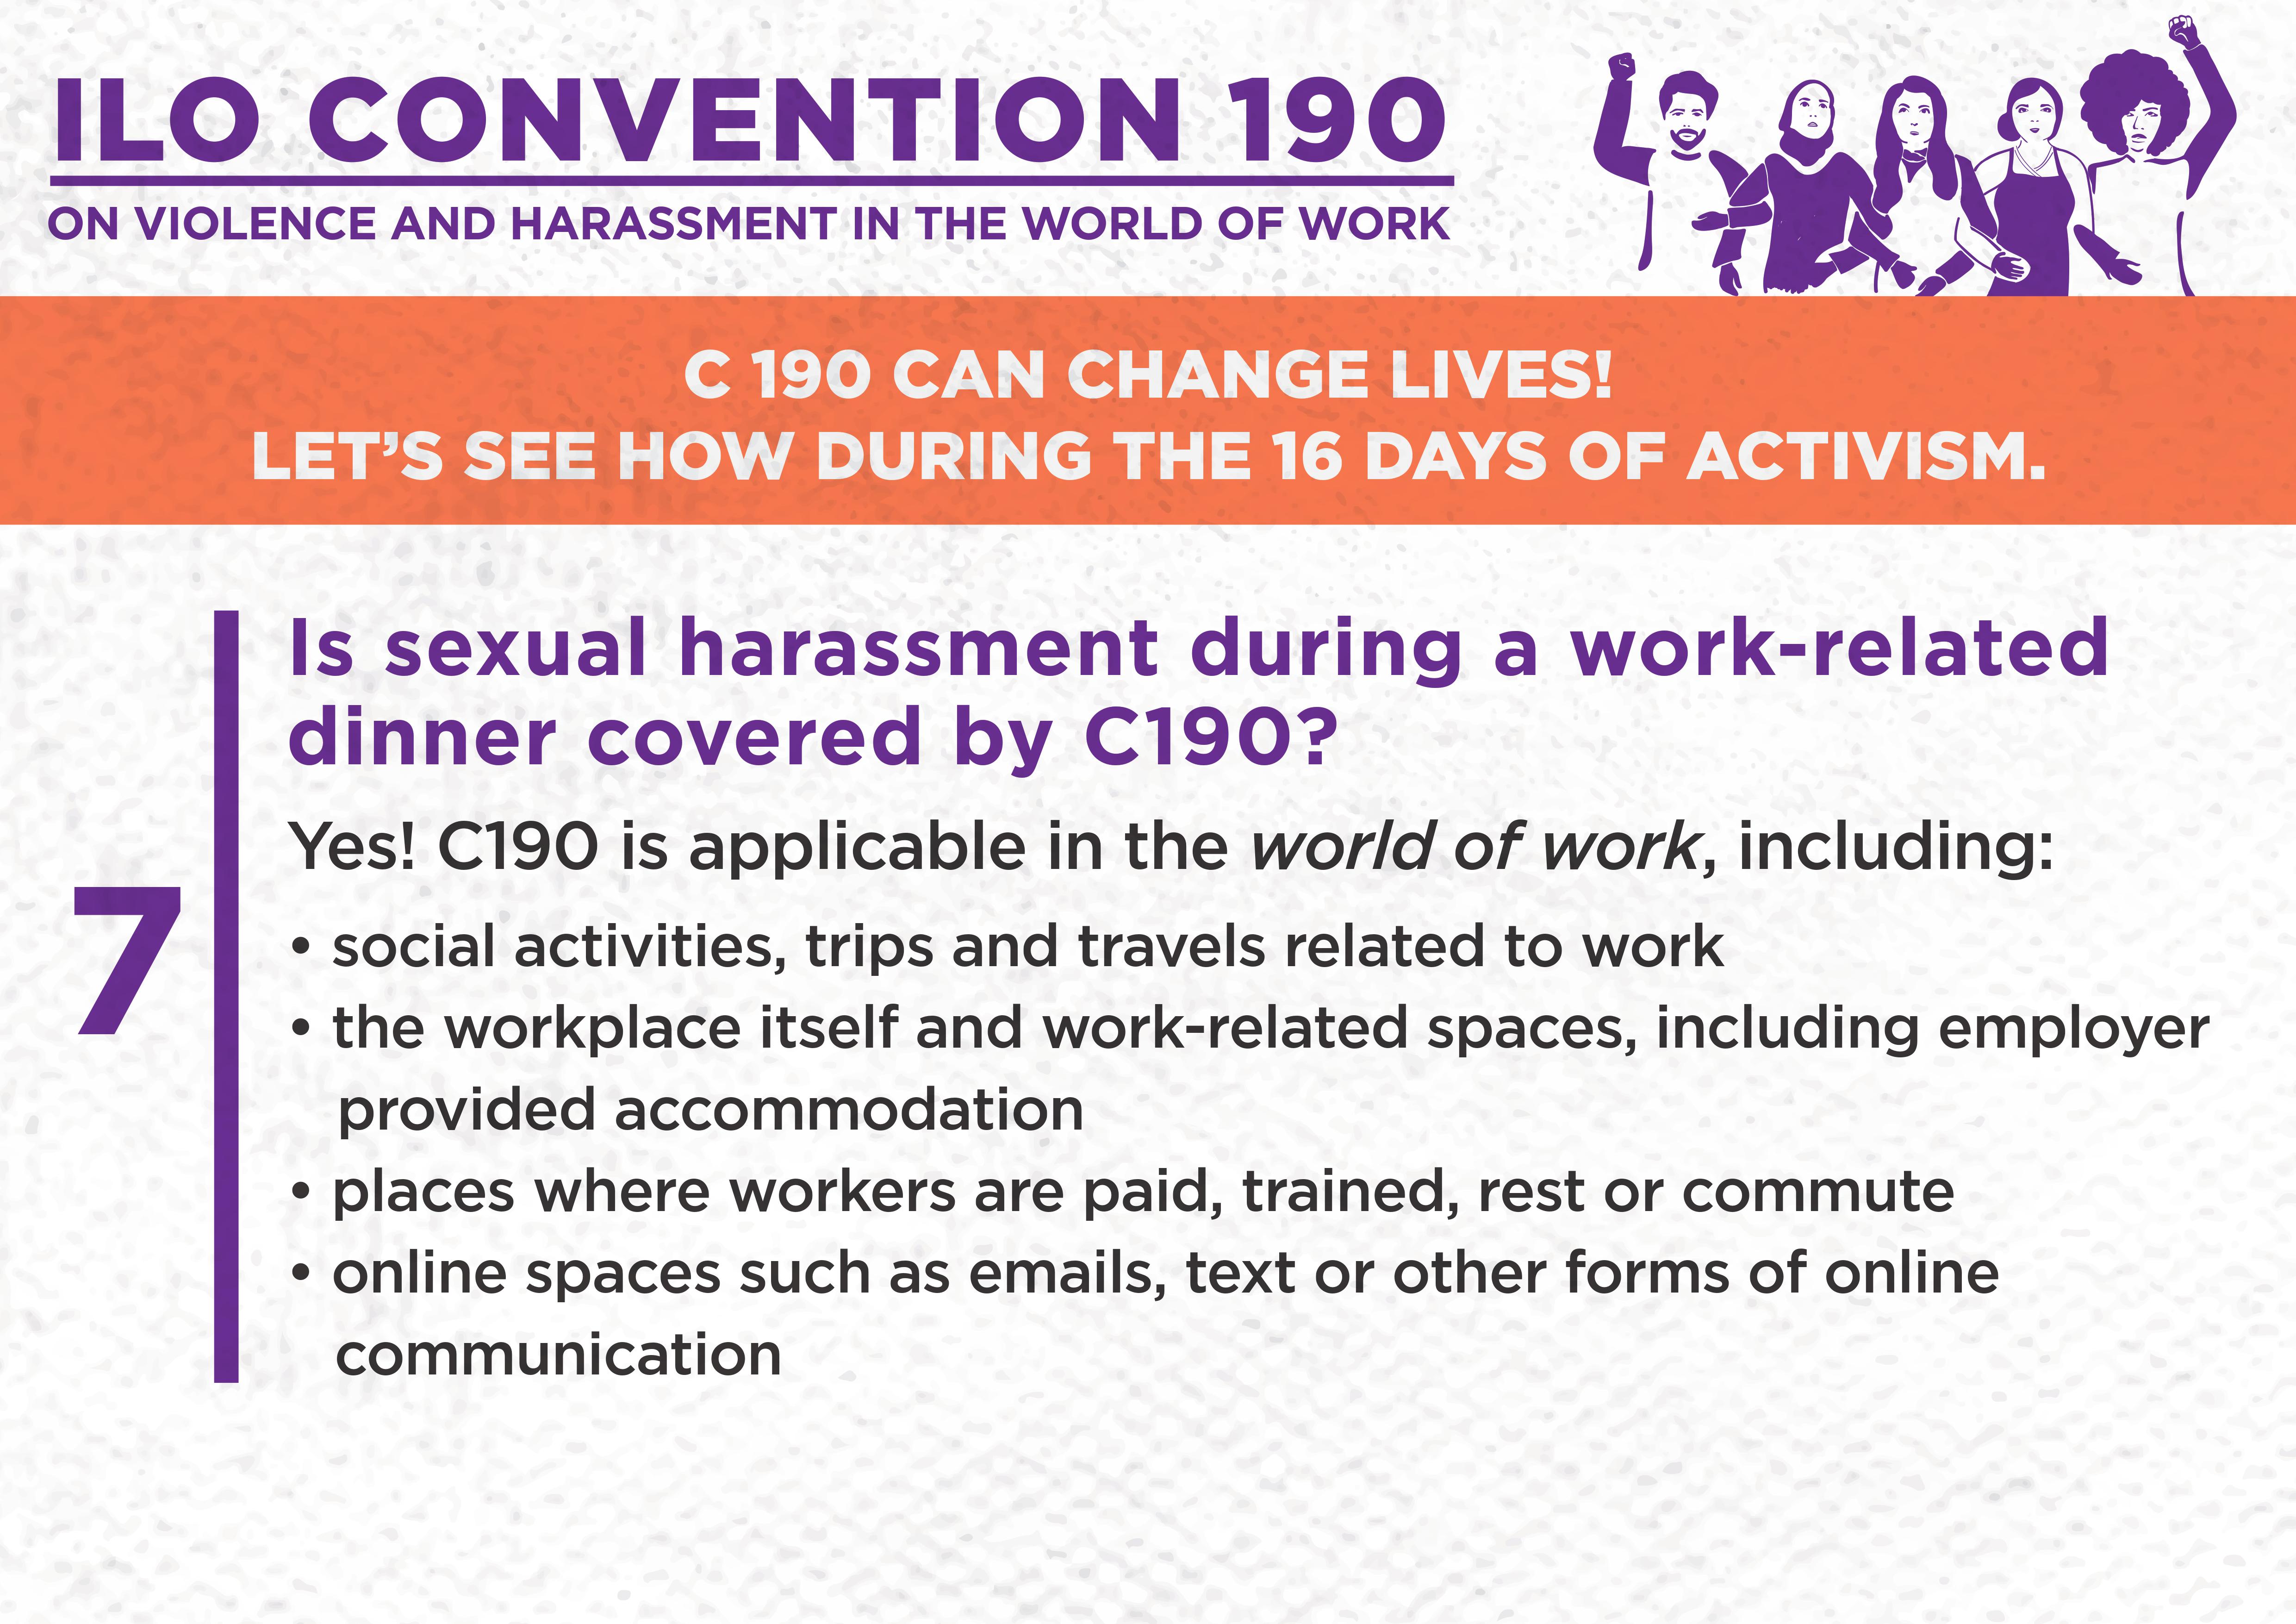 7. Is sexual harassment during a work-related dinner covered by C190?